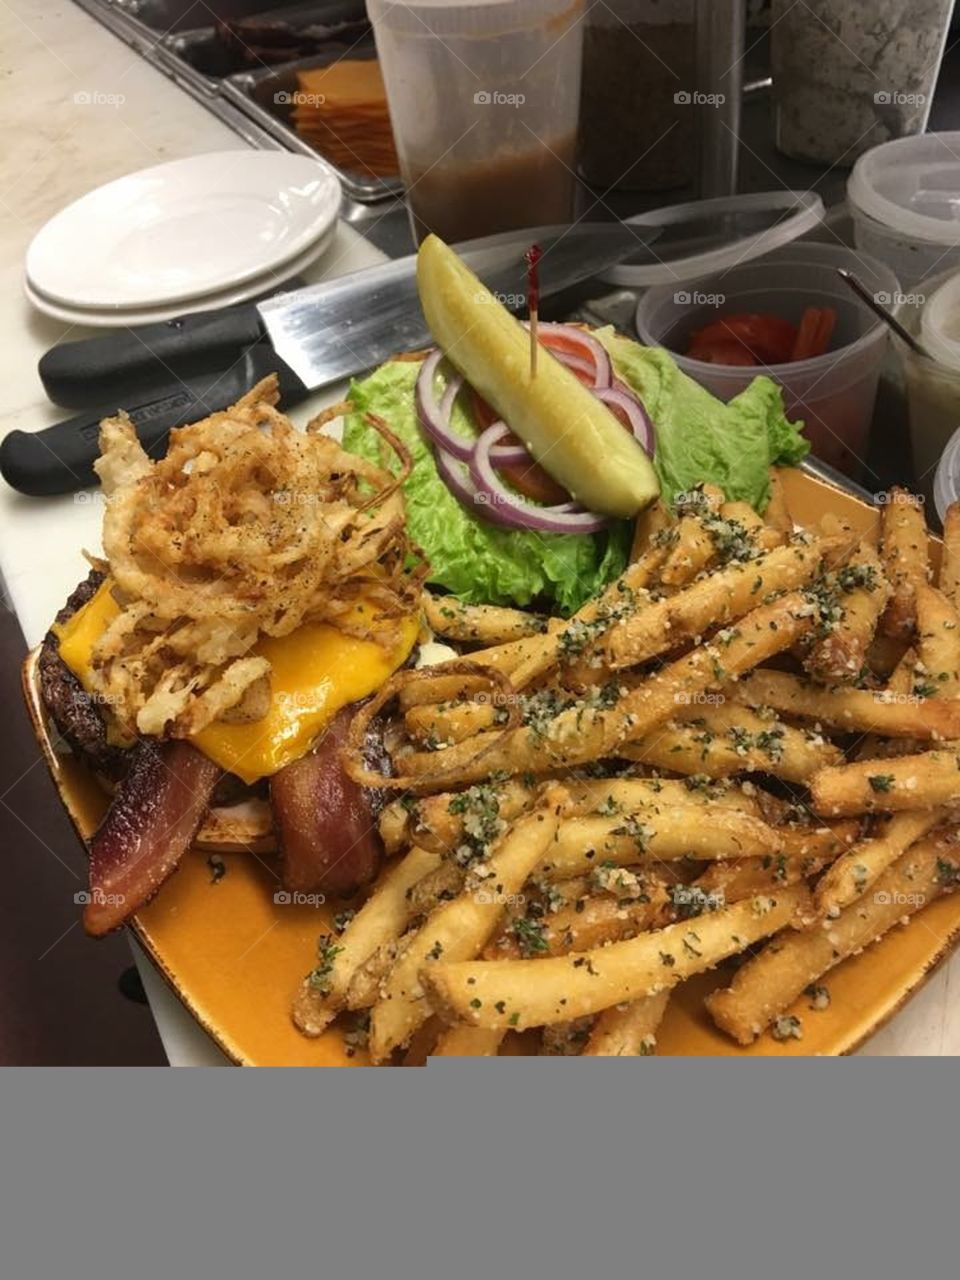 Loaded bacon Burger w/ truffle fries for dinner. 